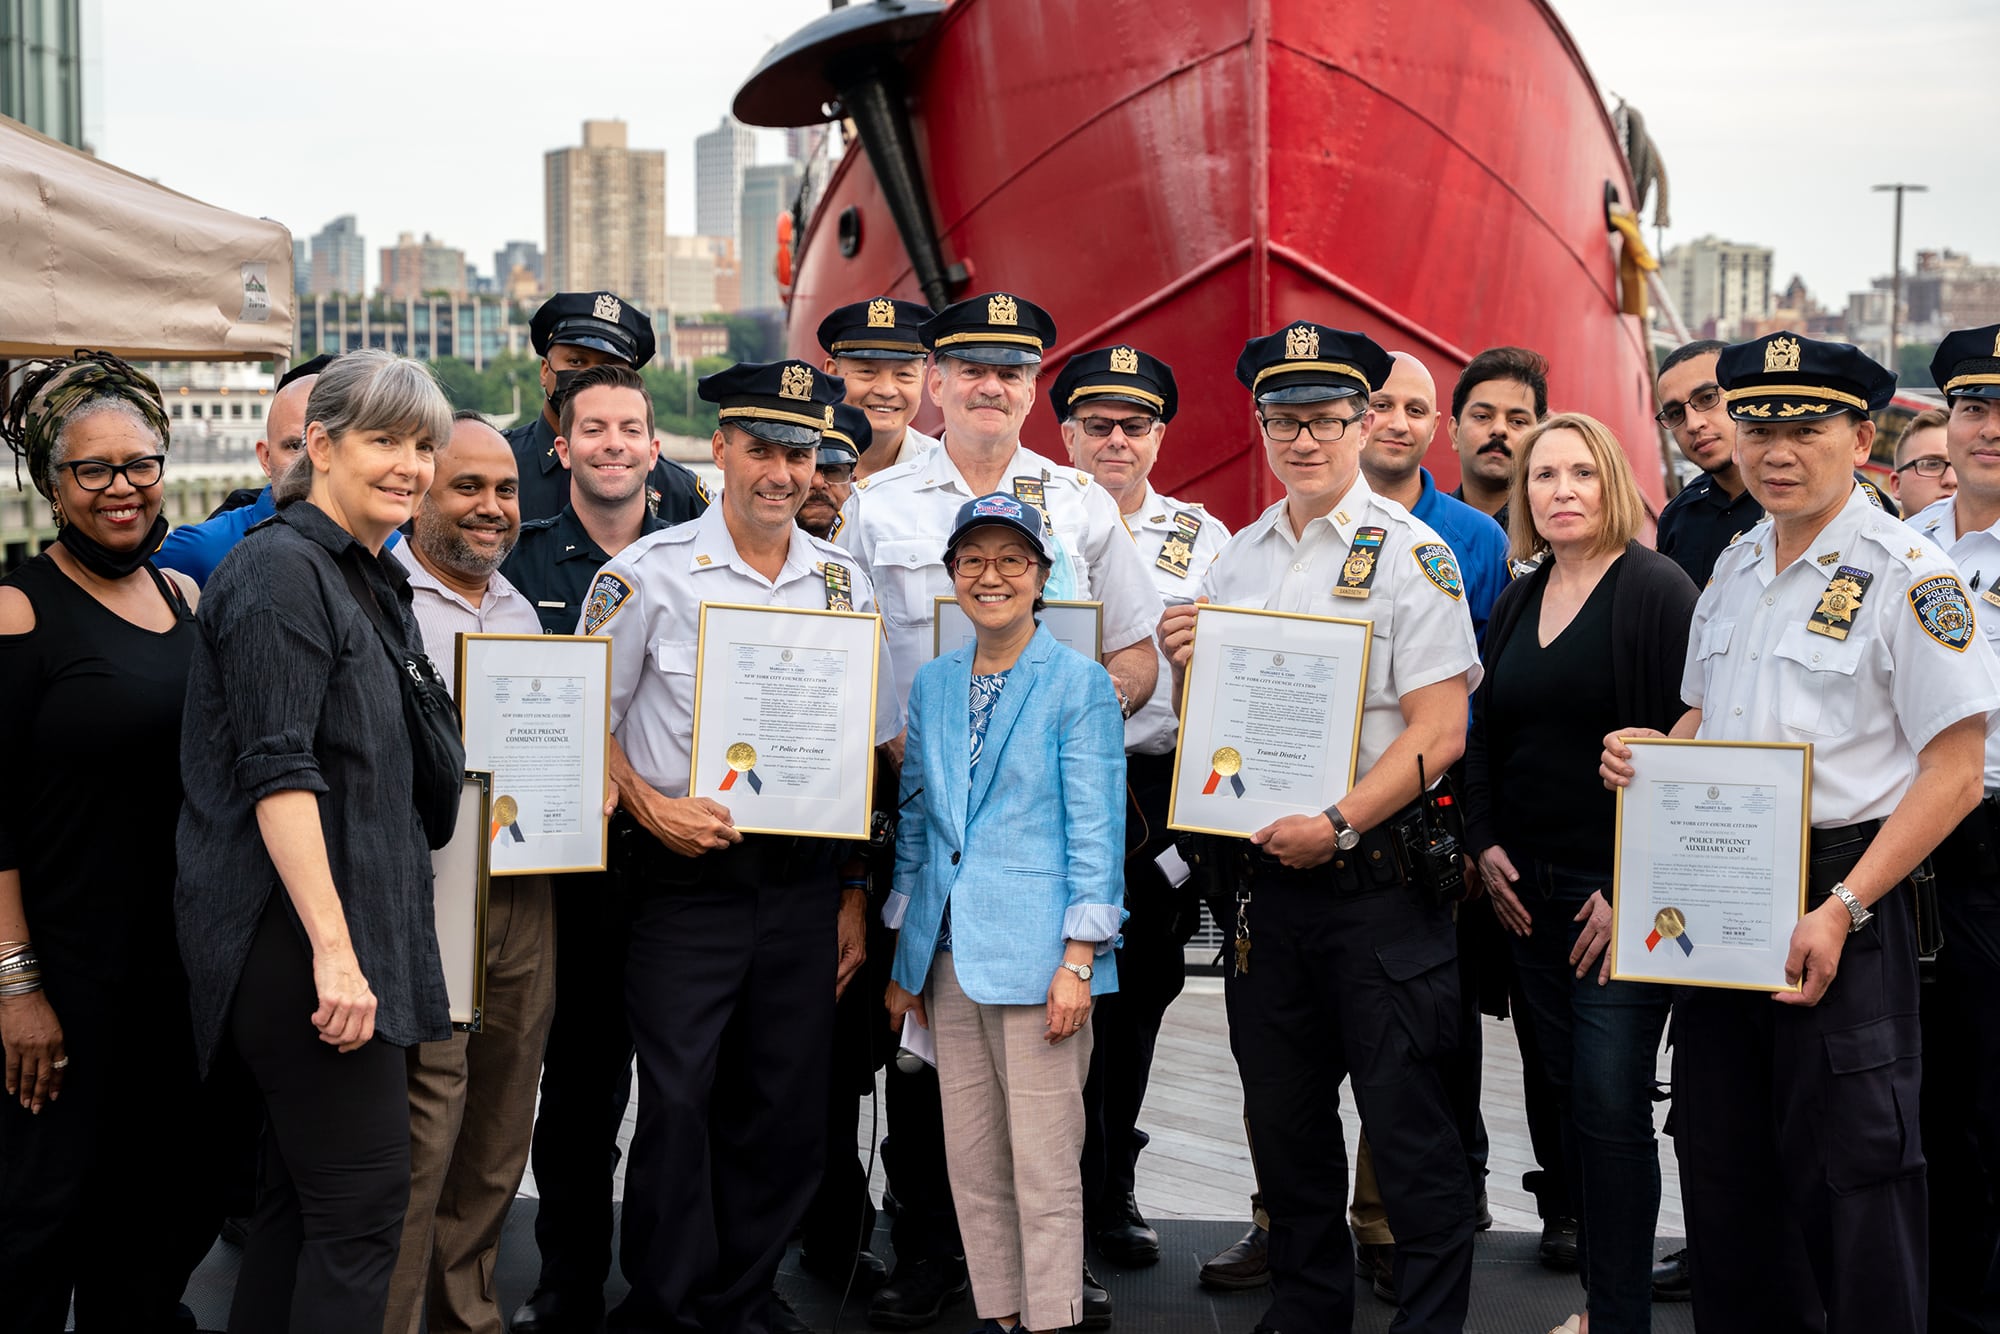 NYPD Officers holding awards at Pier 17